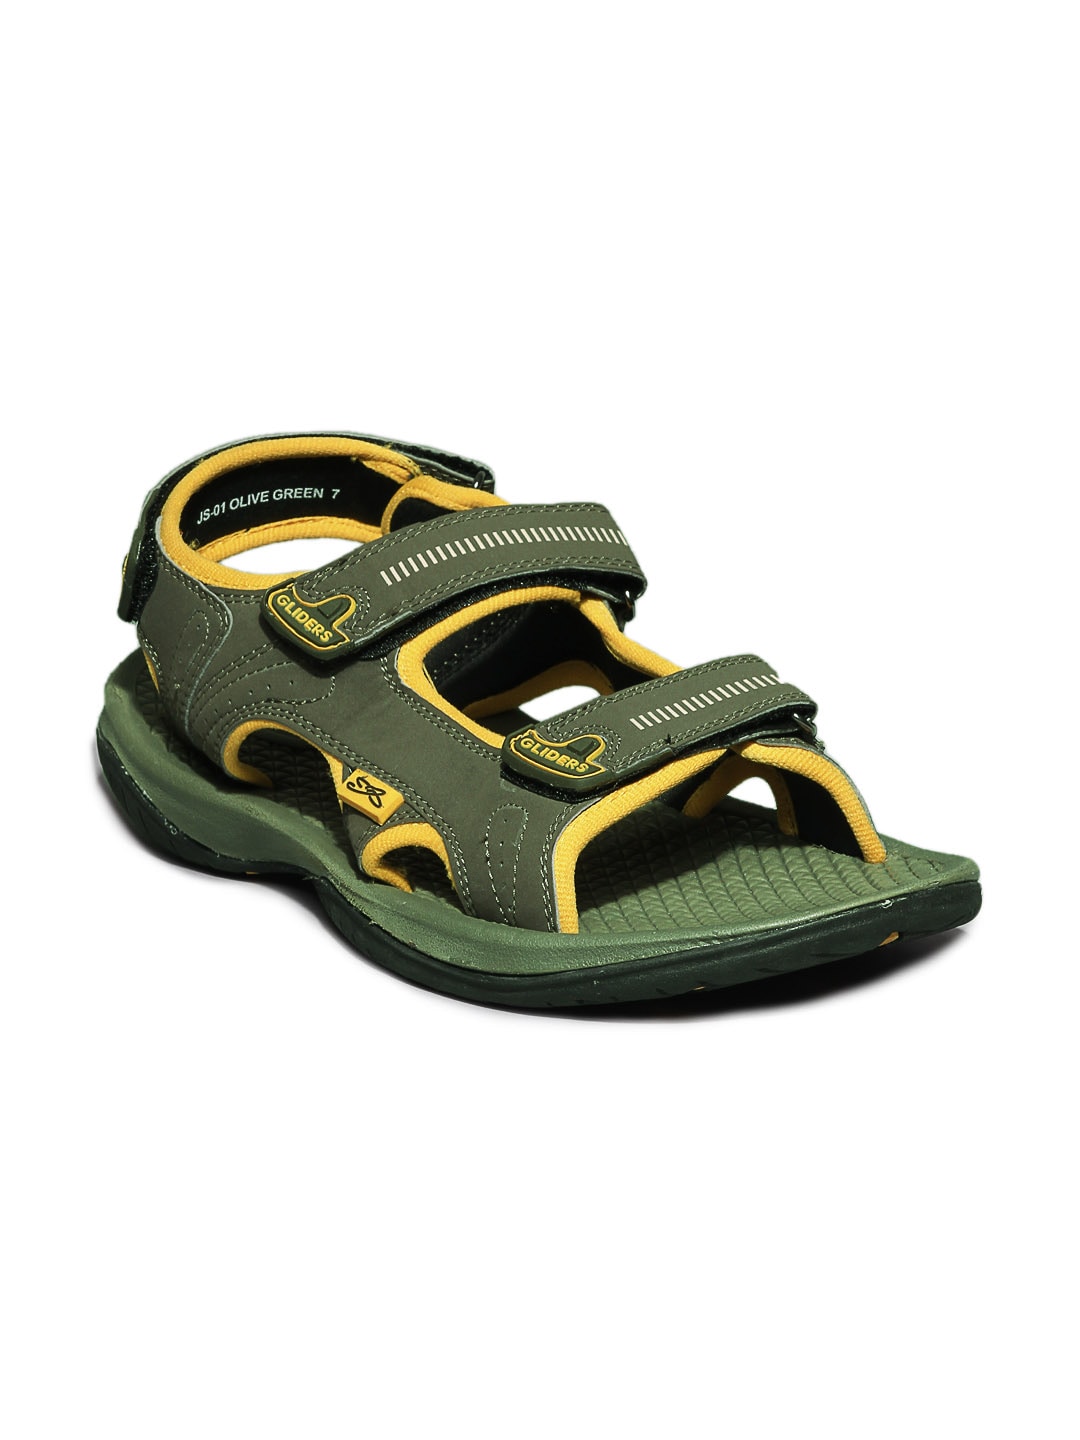 Gliders Men Olive Green Floaters